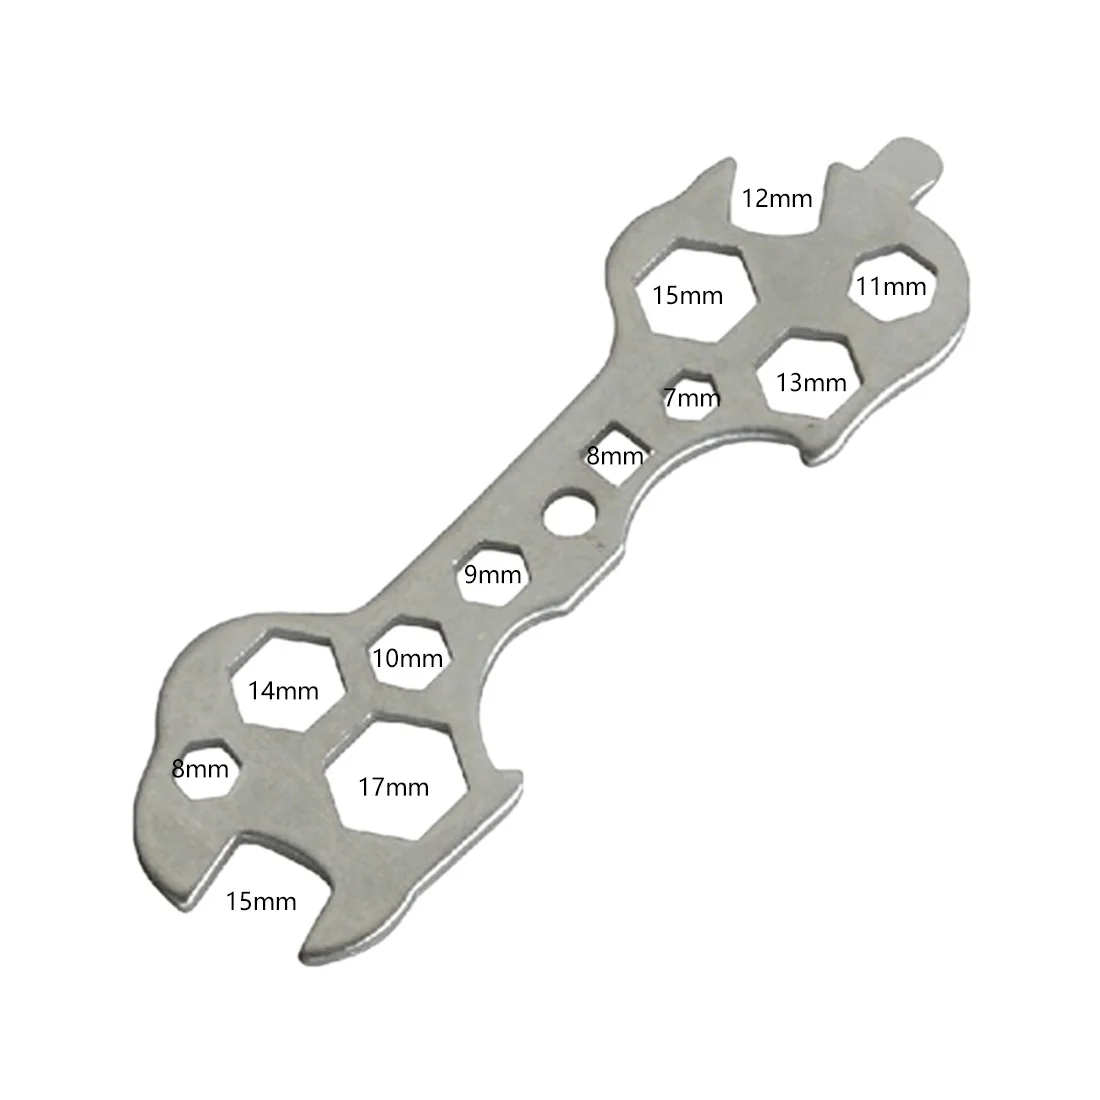 Andux Land Bicycle Hex Spanner Hexagon Wrench Compact Repair Tool Kit LJBS-01 